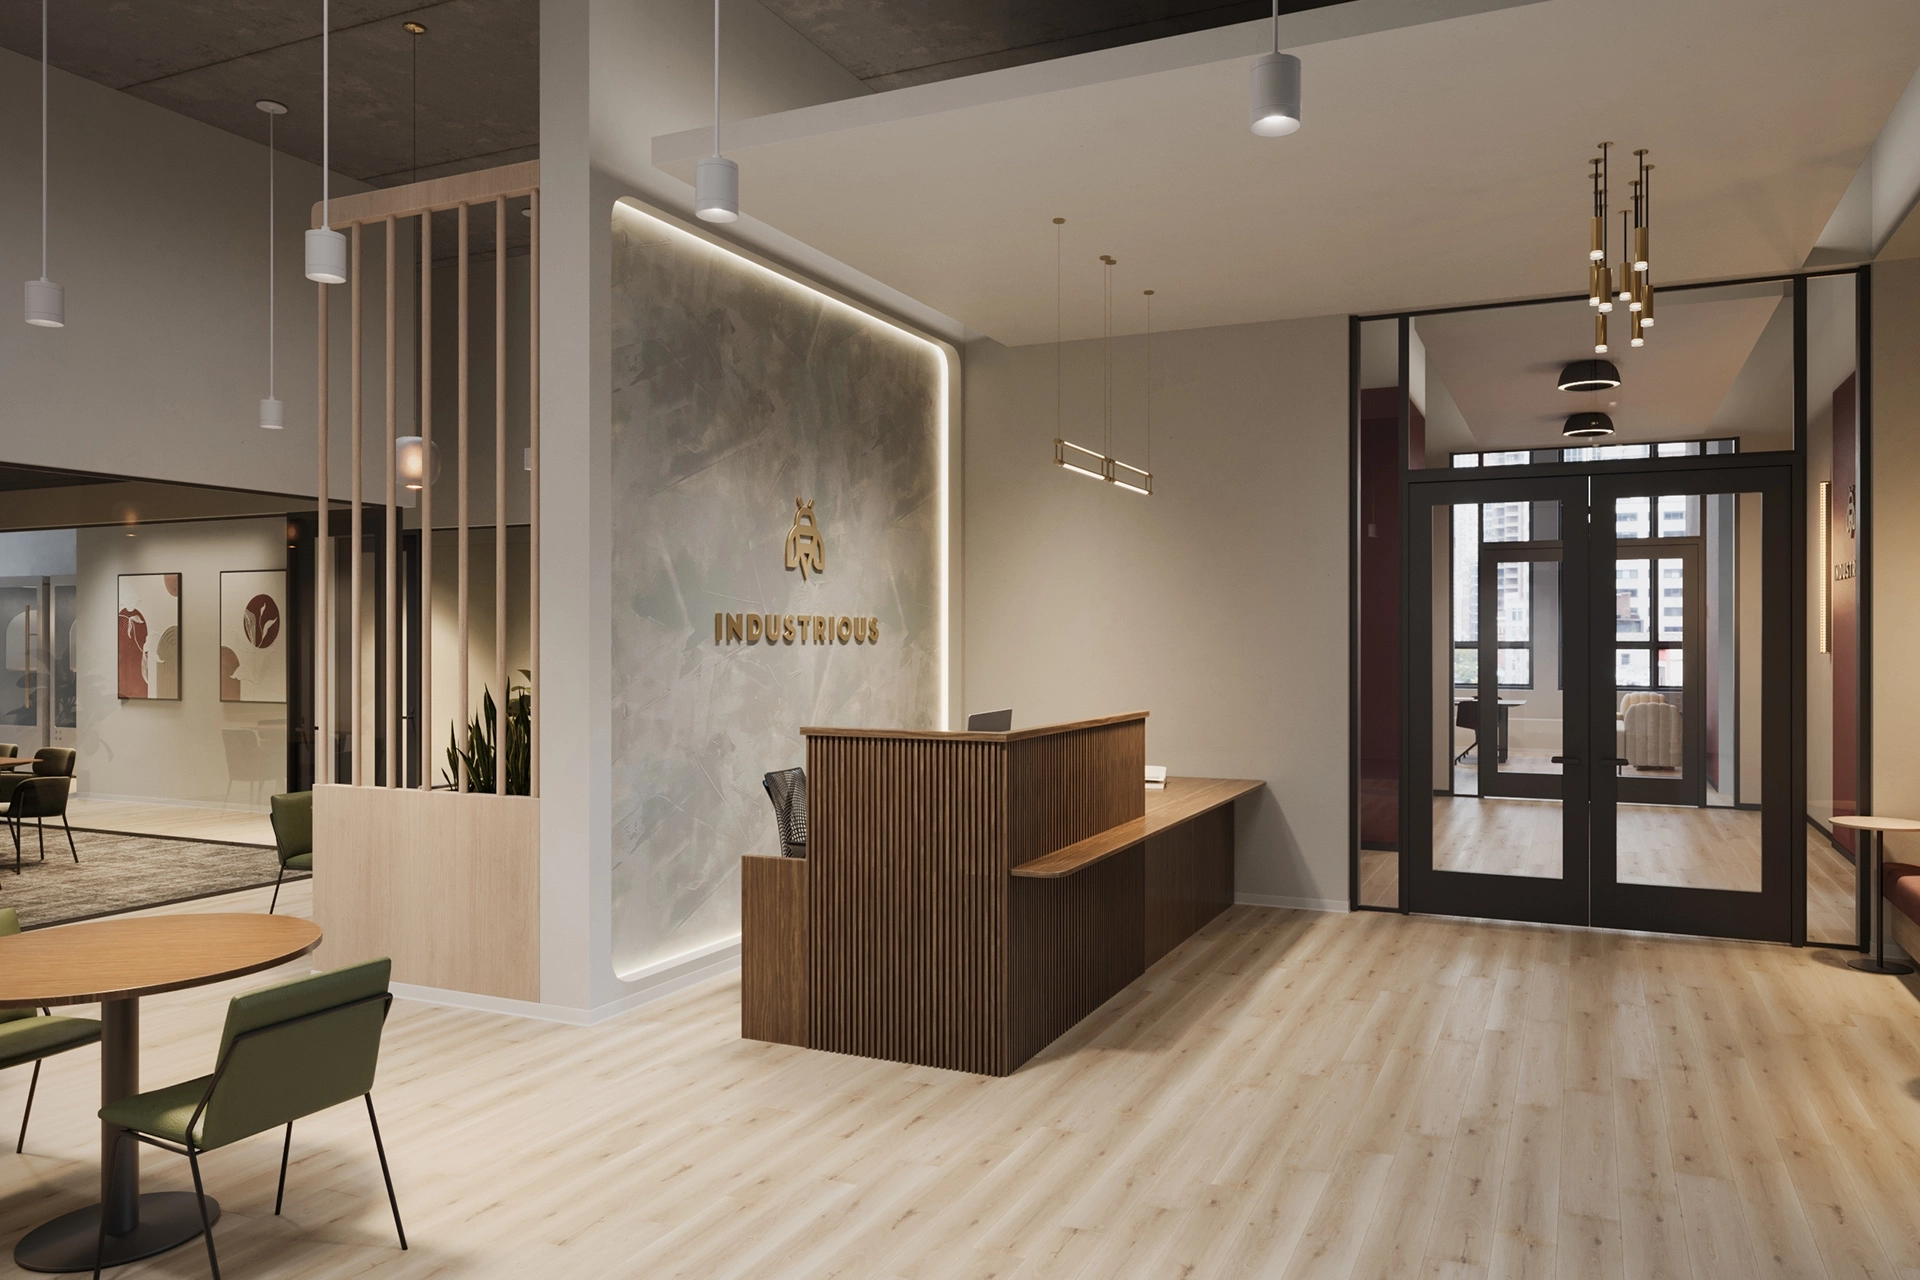 Modern office lobby with reception desk, contemporary decor, and coworking workspace.